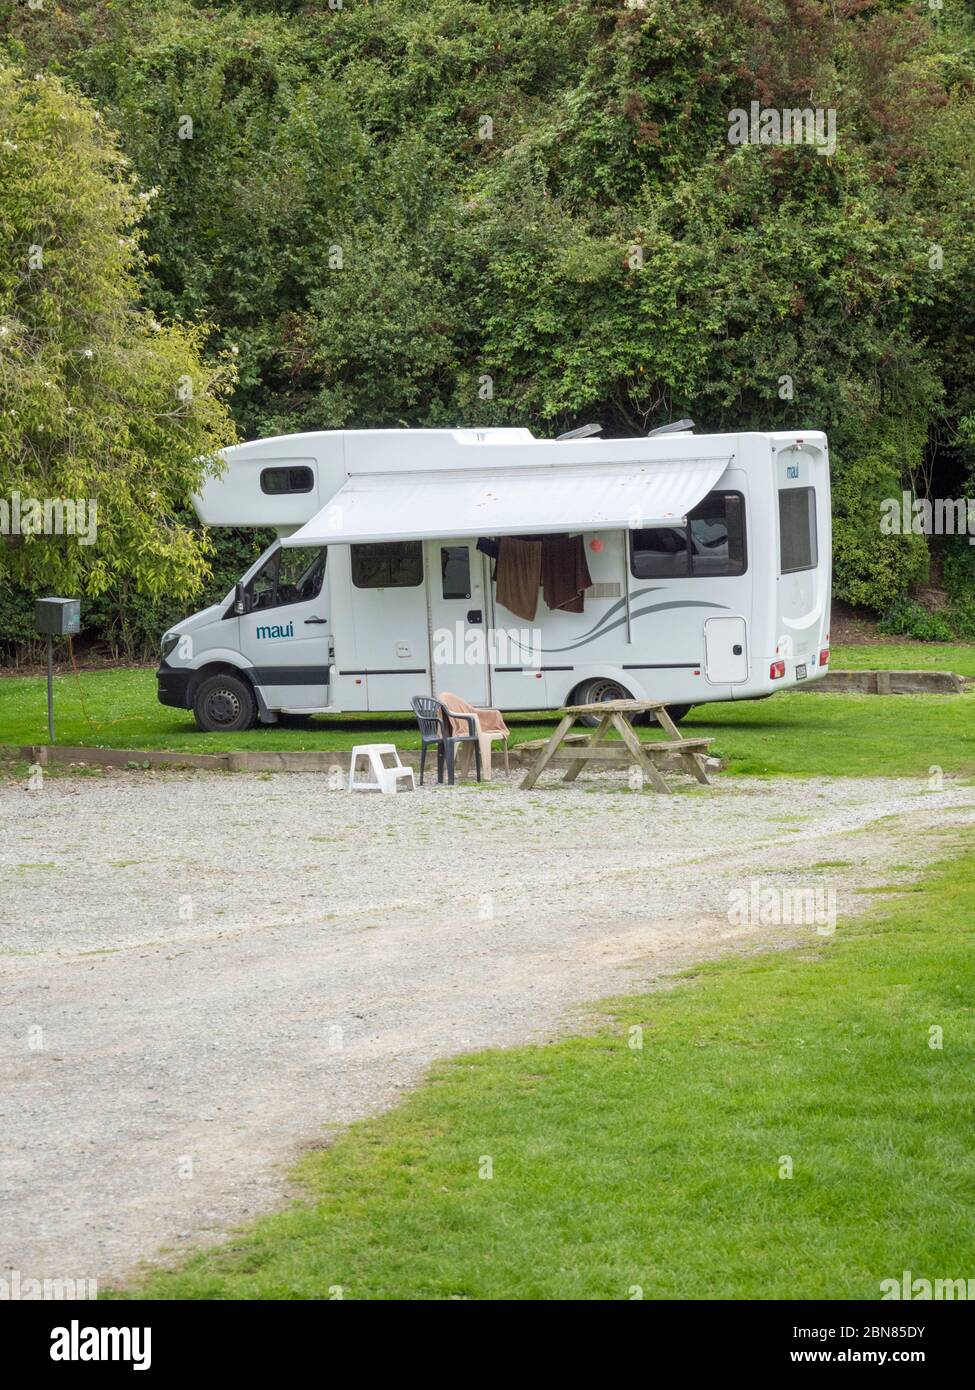 A Maui motorhome or campervan parked on a campsite in New Zealand Stock Photo